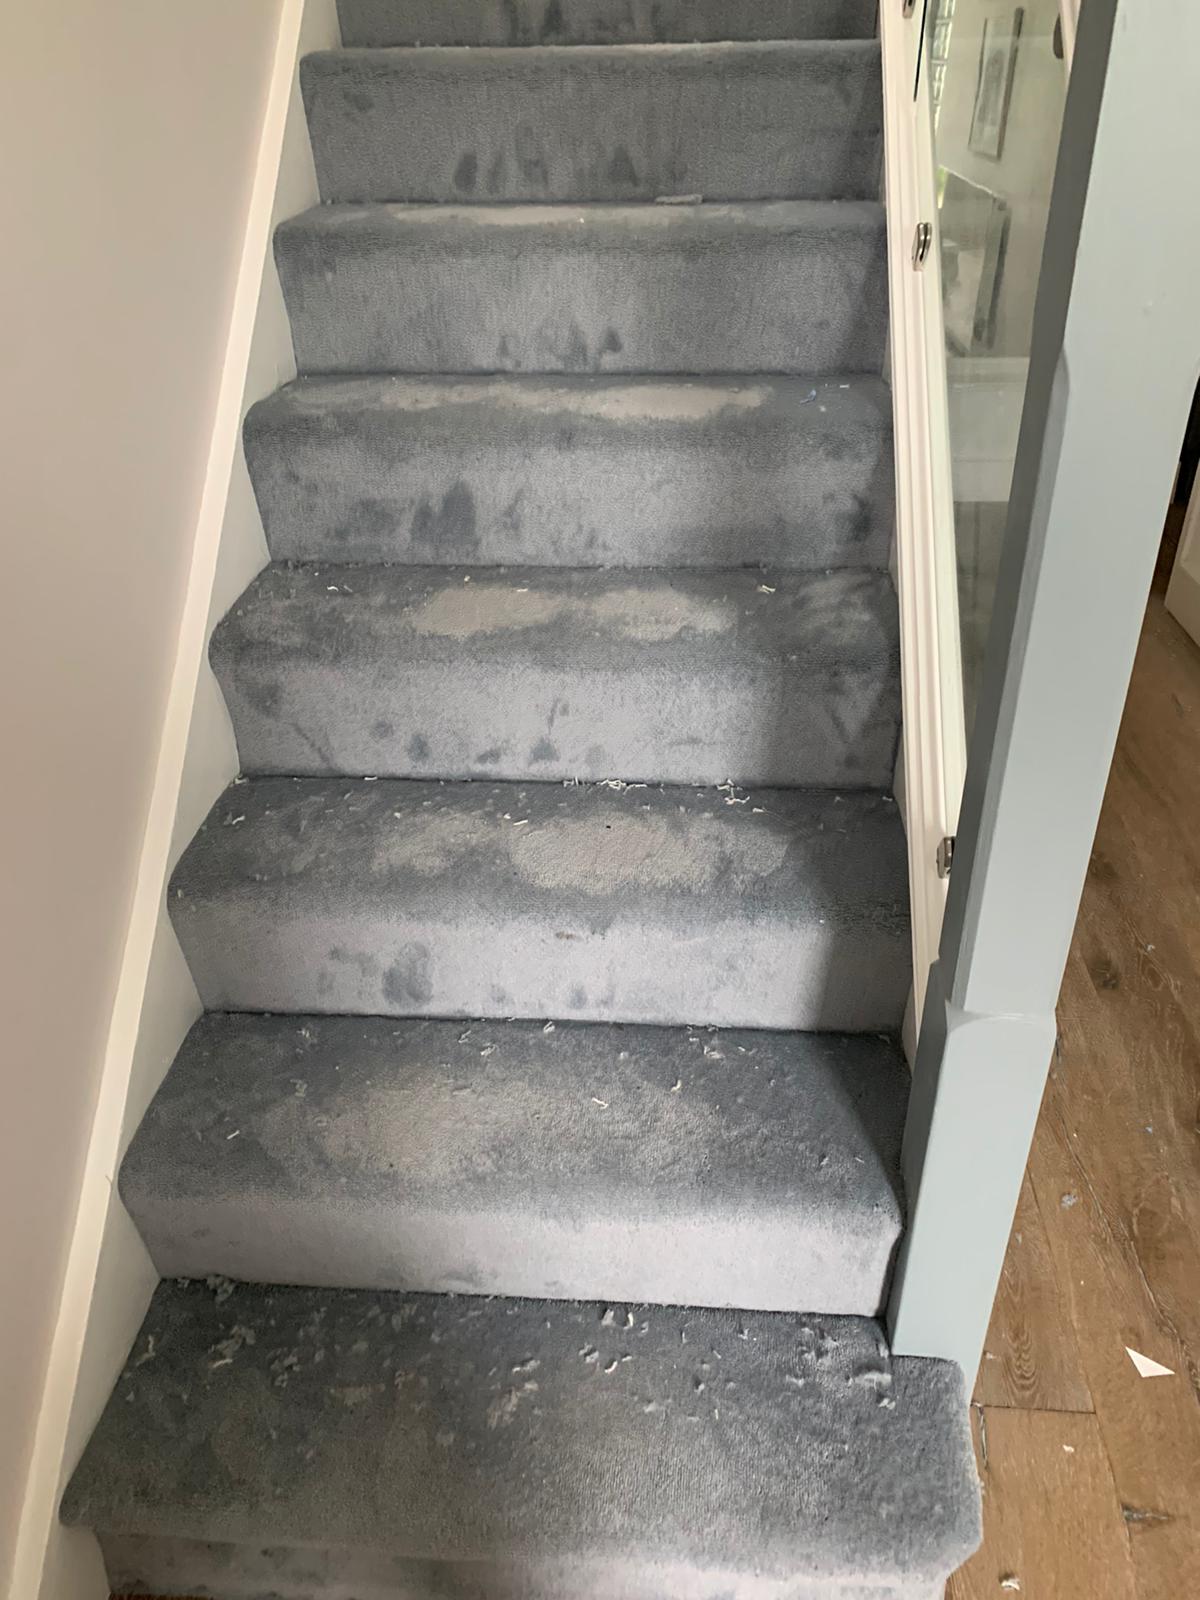 //blackwellcontracts.ie/wp-content/uploads/2020/03/house-cleaners-before.jpg